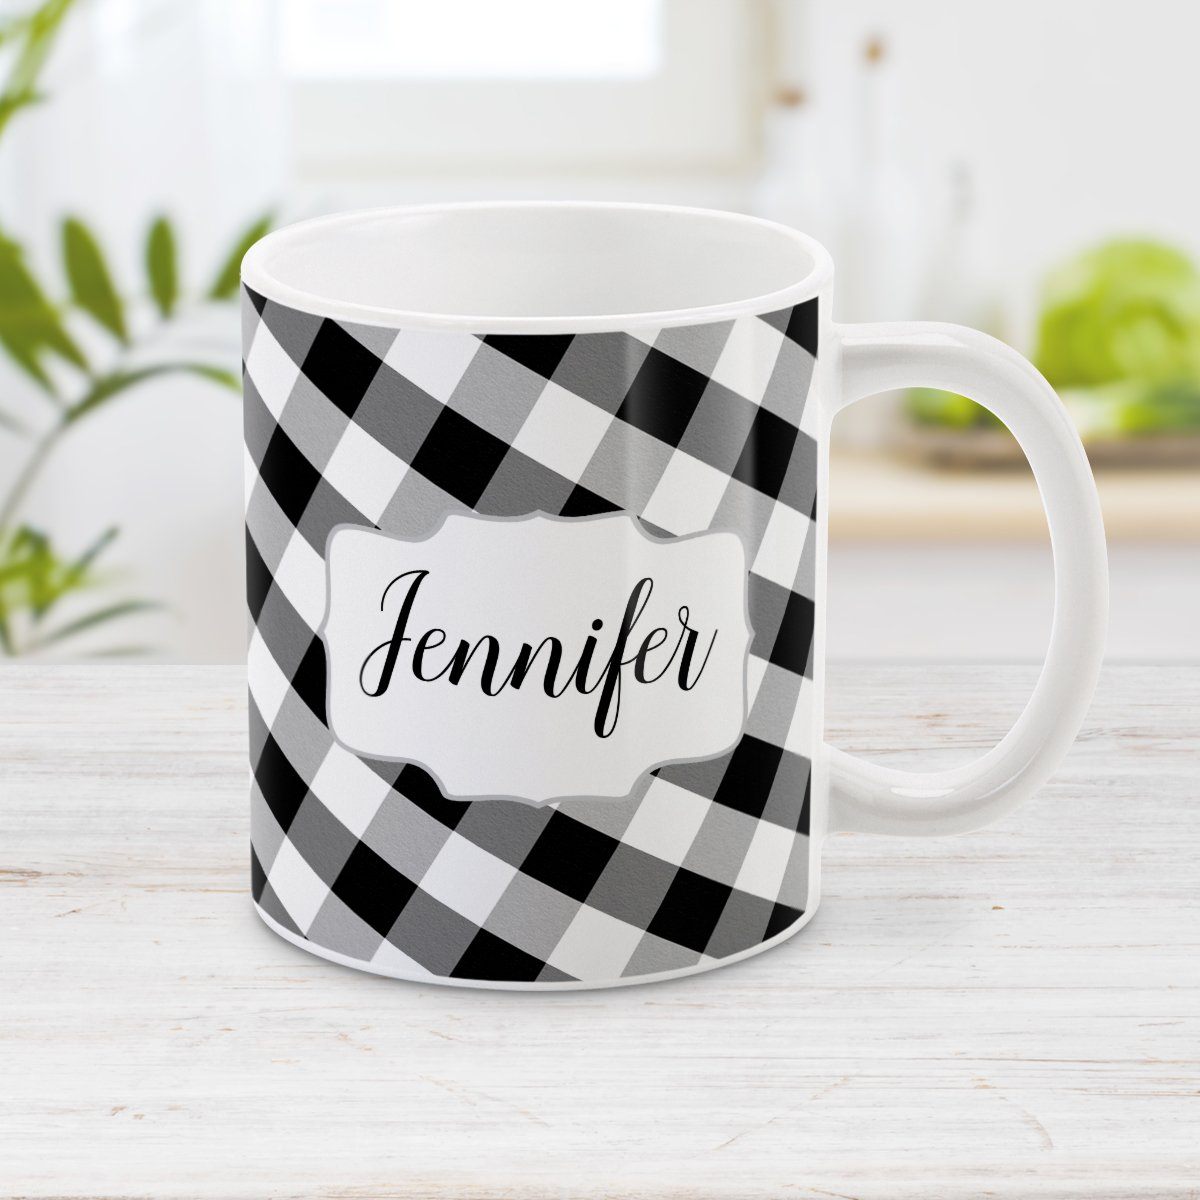 Personalized Black and White Gingham Mug (11oz) at Amy's Coffee Mugs